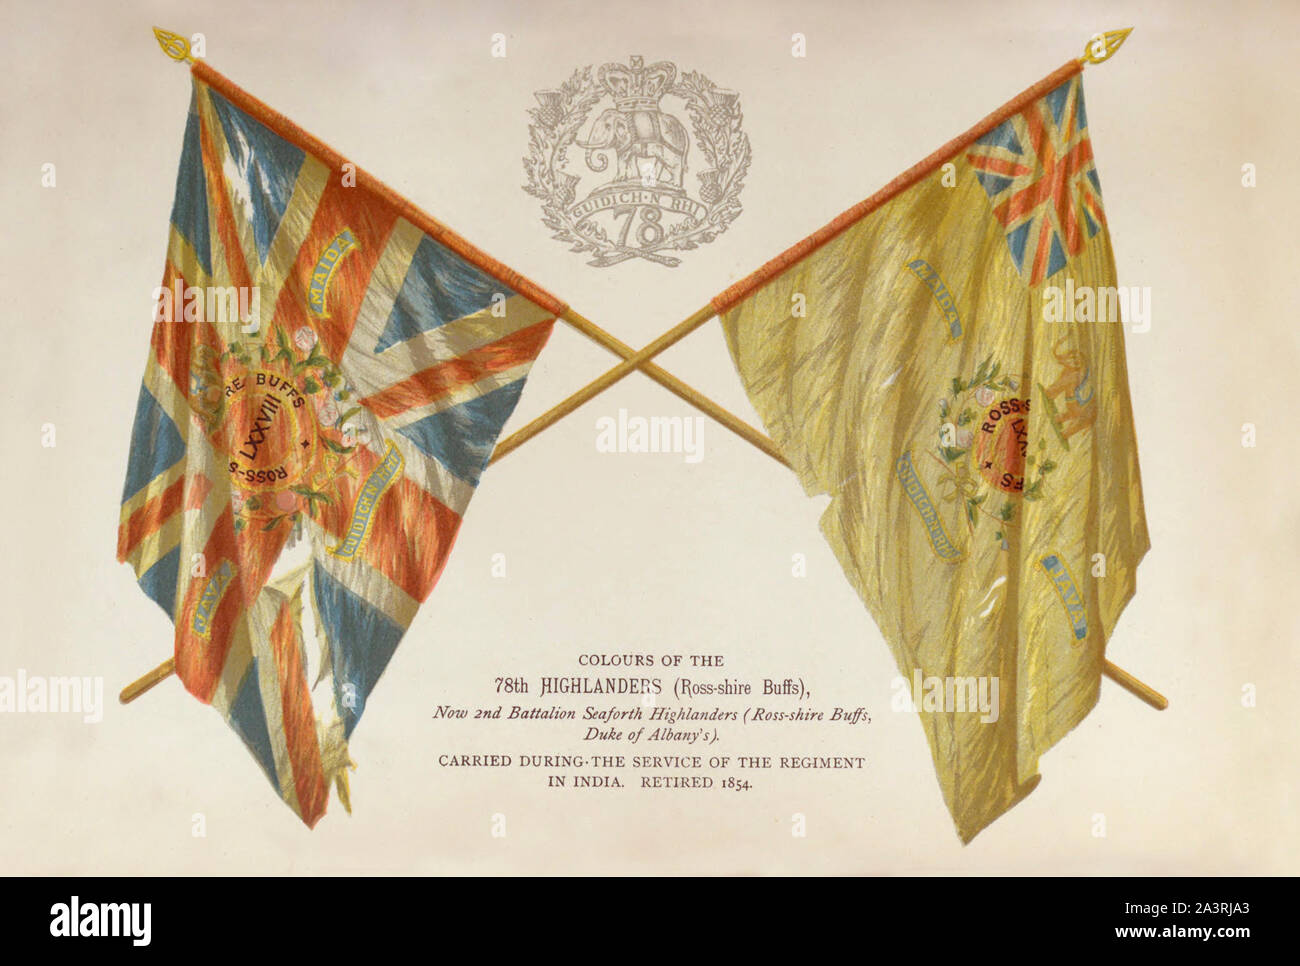 Colours of the 78th Highlanders (Ross-shire Buffs), now 2nd Battalion Seaforth Highlanders (Ross-shire Buffs, Duke of Albany's). Carried during the se Stock Photo